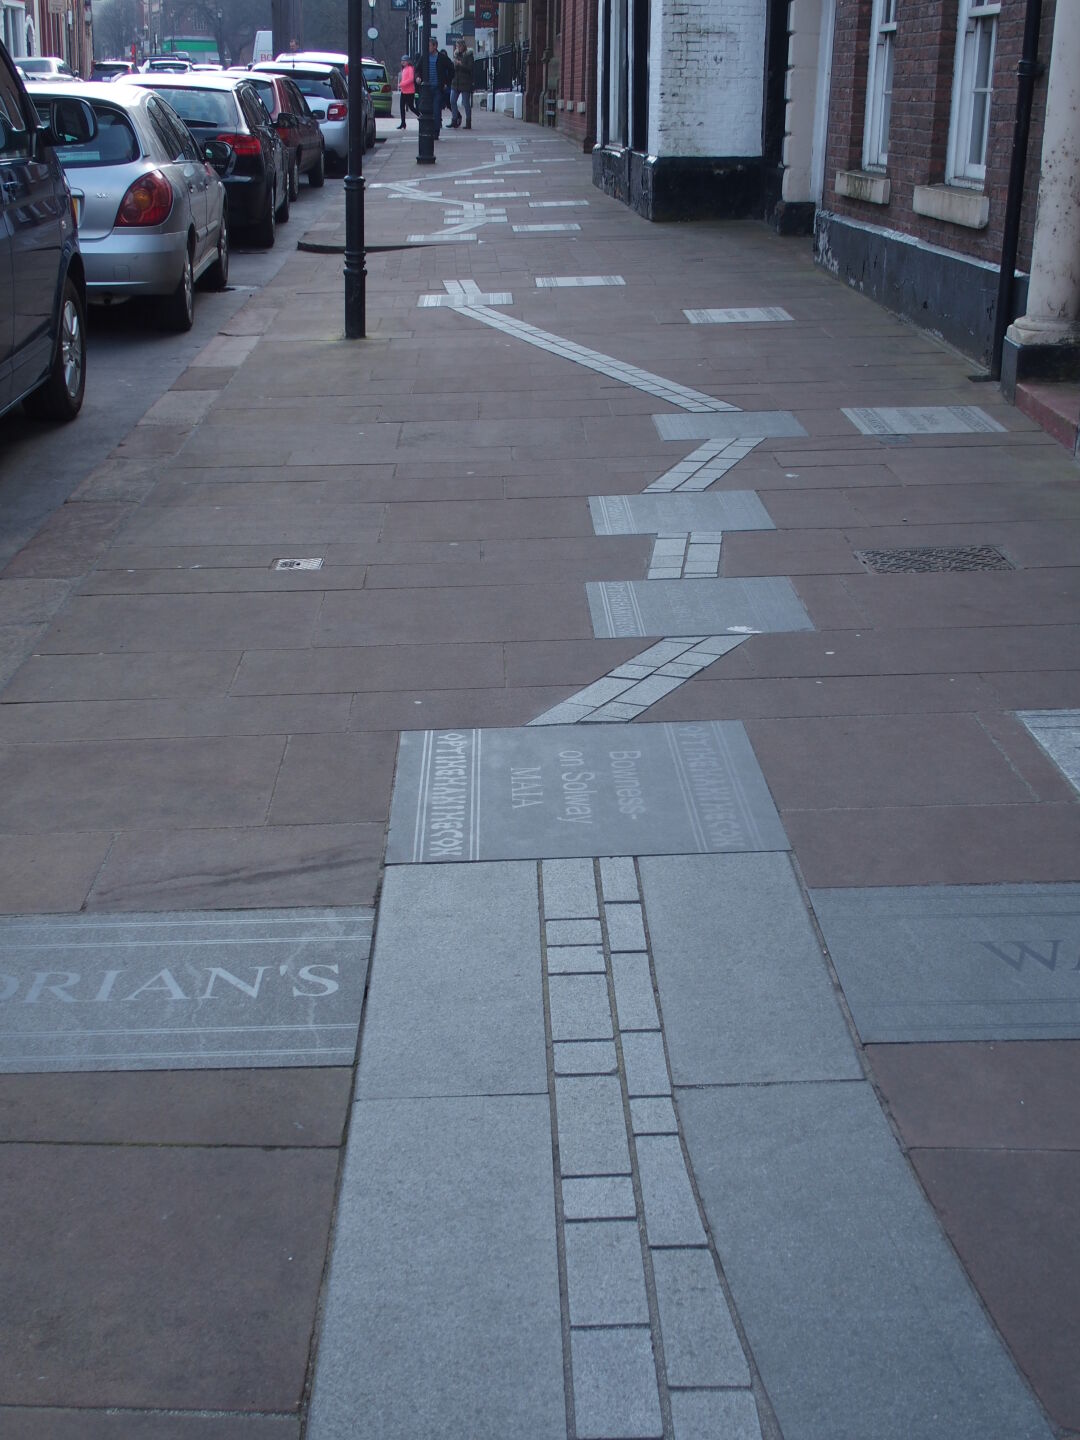 Hadrian&rsquo;s Wall Path embedded in the pavement in Carlisle.